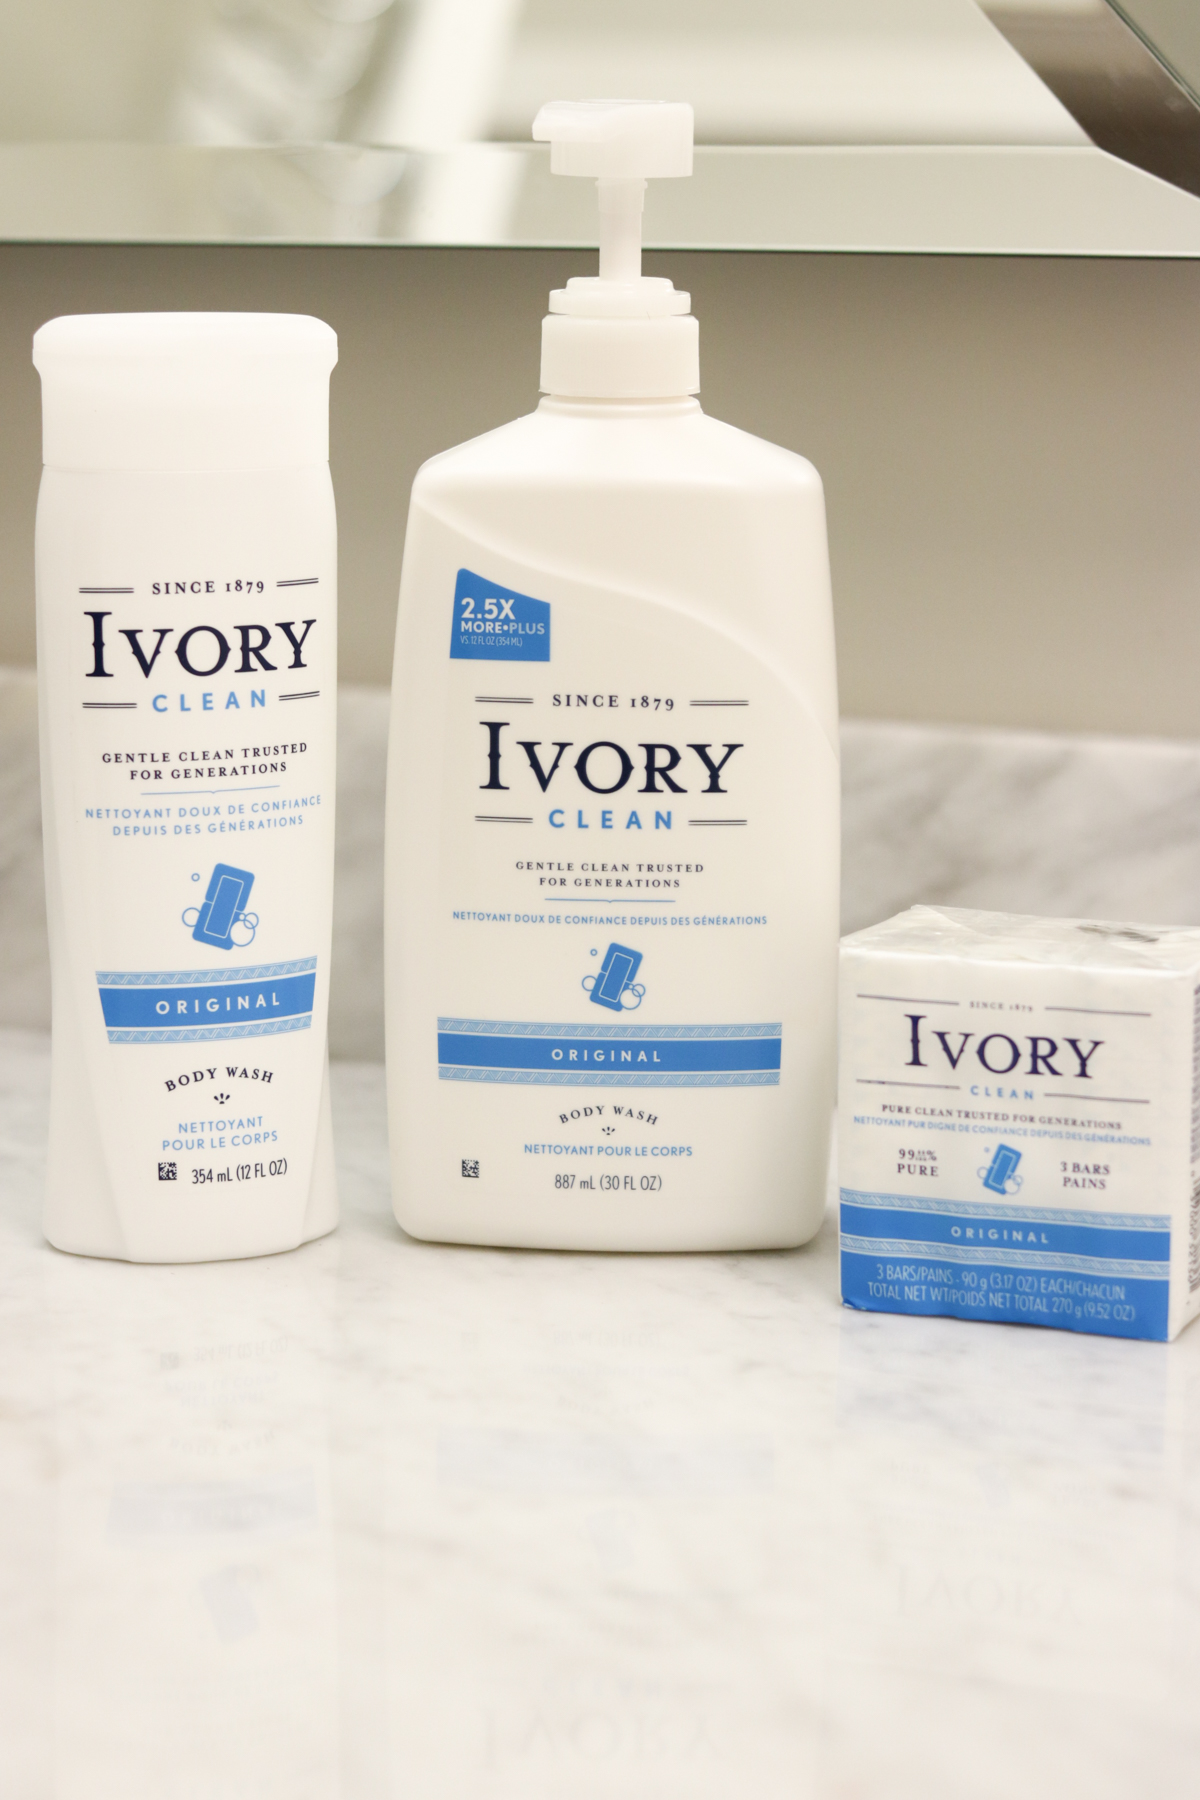 Ivory Helps Simplify Our Everyday Routine